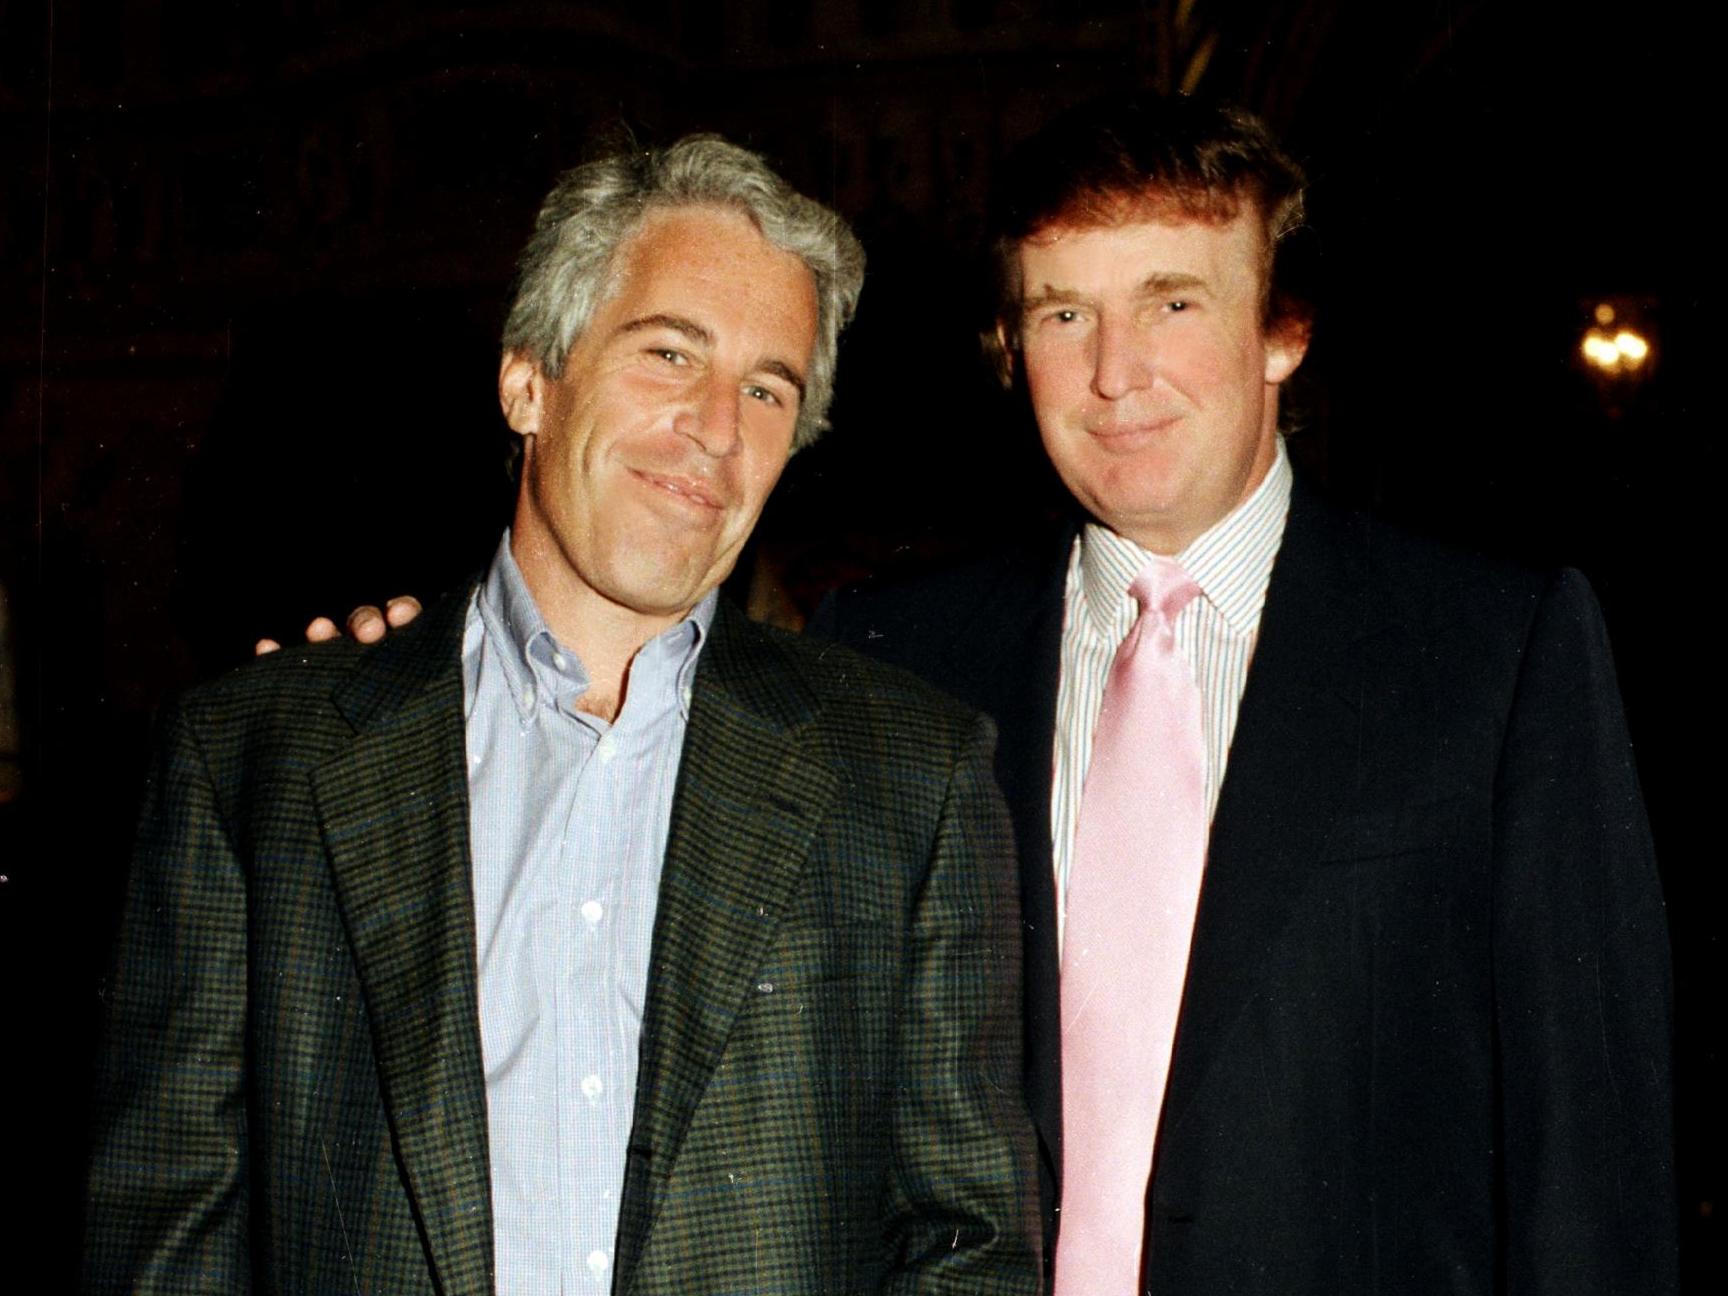 There is no indication that Mr Trump committed any wrongdoing and he has not been charged with involvement in Epstein’s crimes